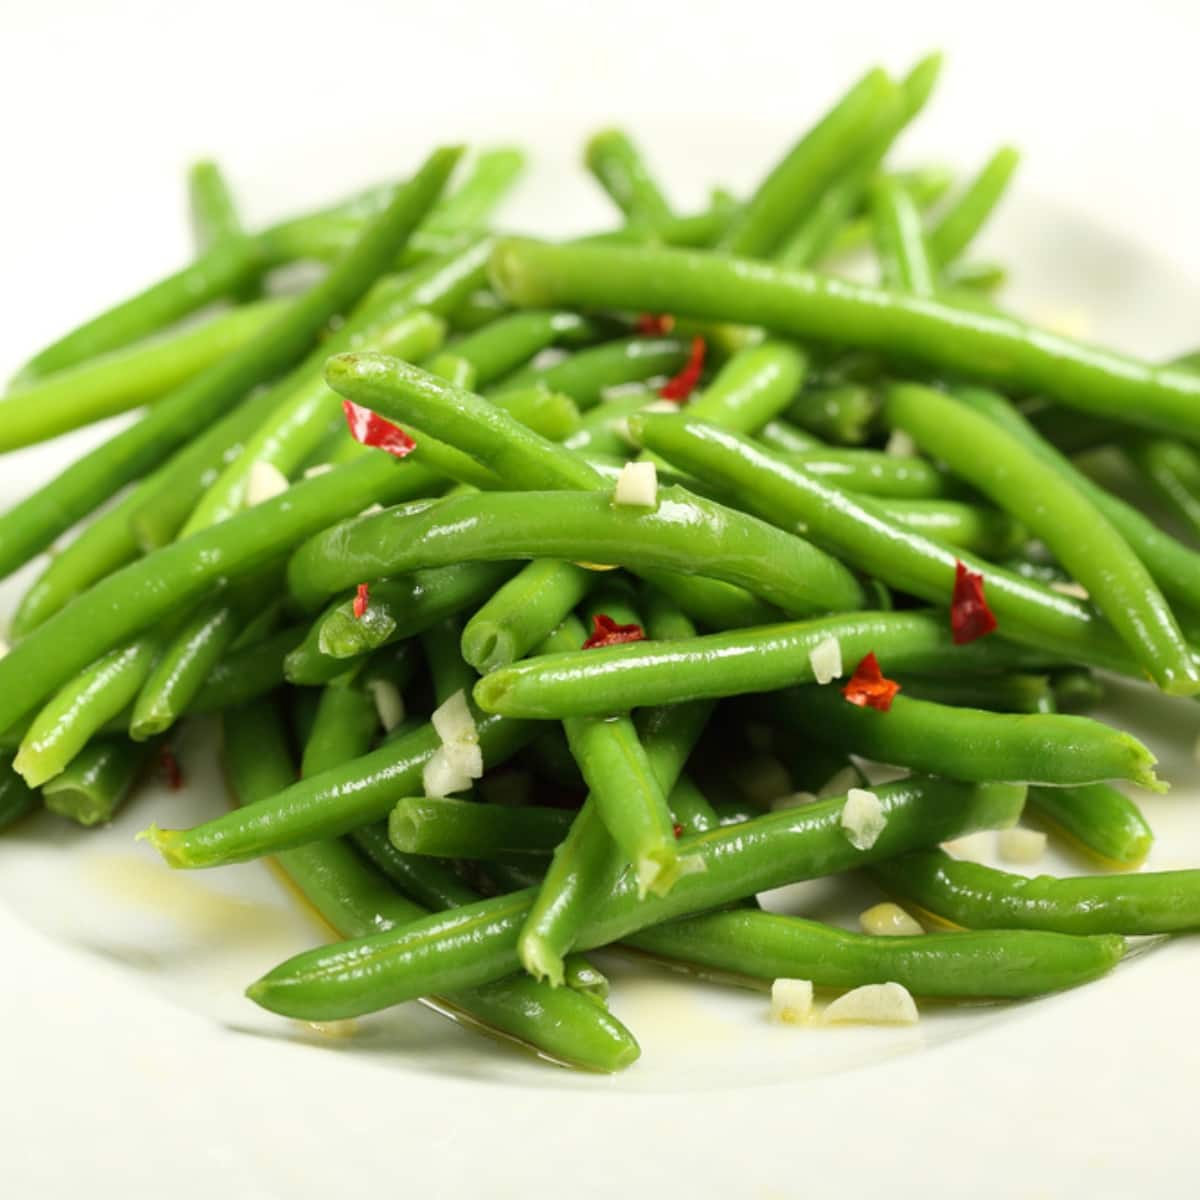 Pile of Microwave Steamed Green Beans With Chili Flakes
